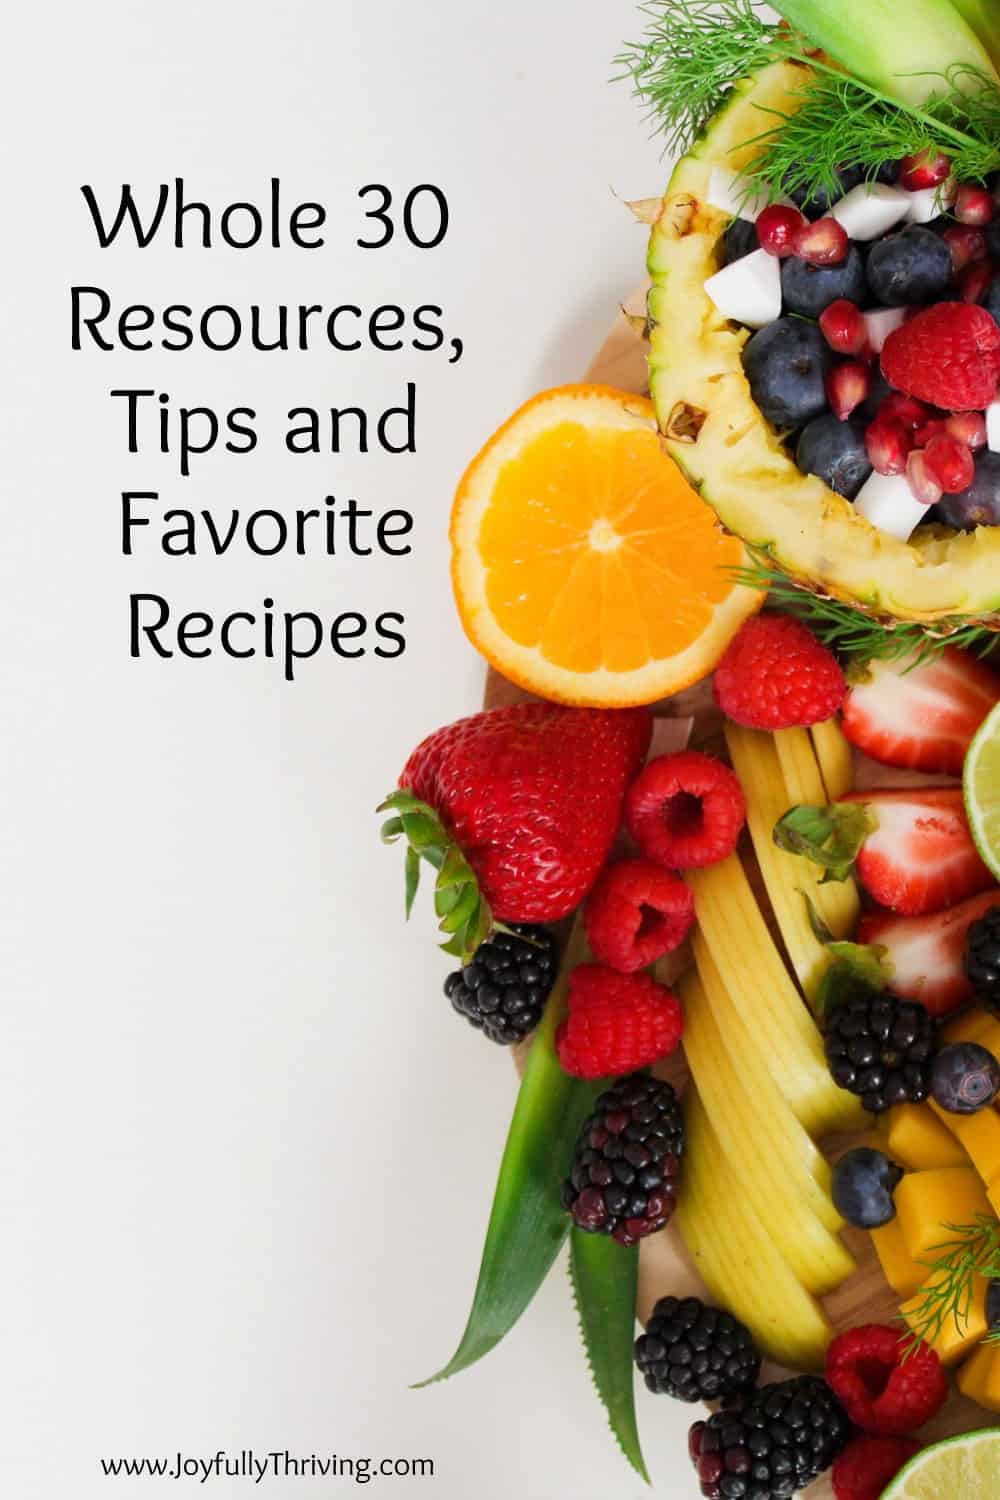 Thinking of attempting a Whole 30? Here are some great Whole 30 resources, tips and favorite recipes from a busy mom of little ones who did the challenge too! #whole30